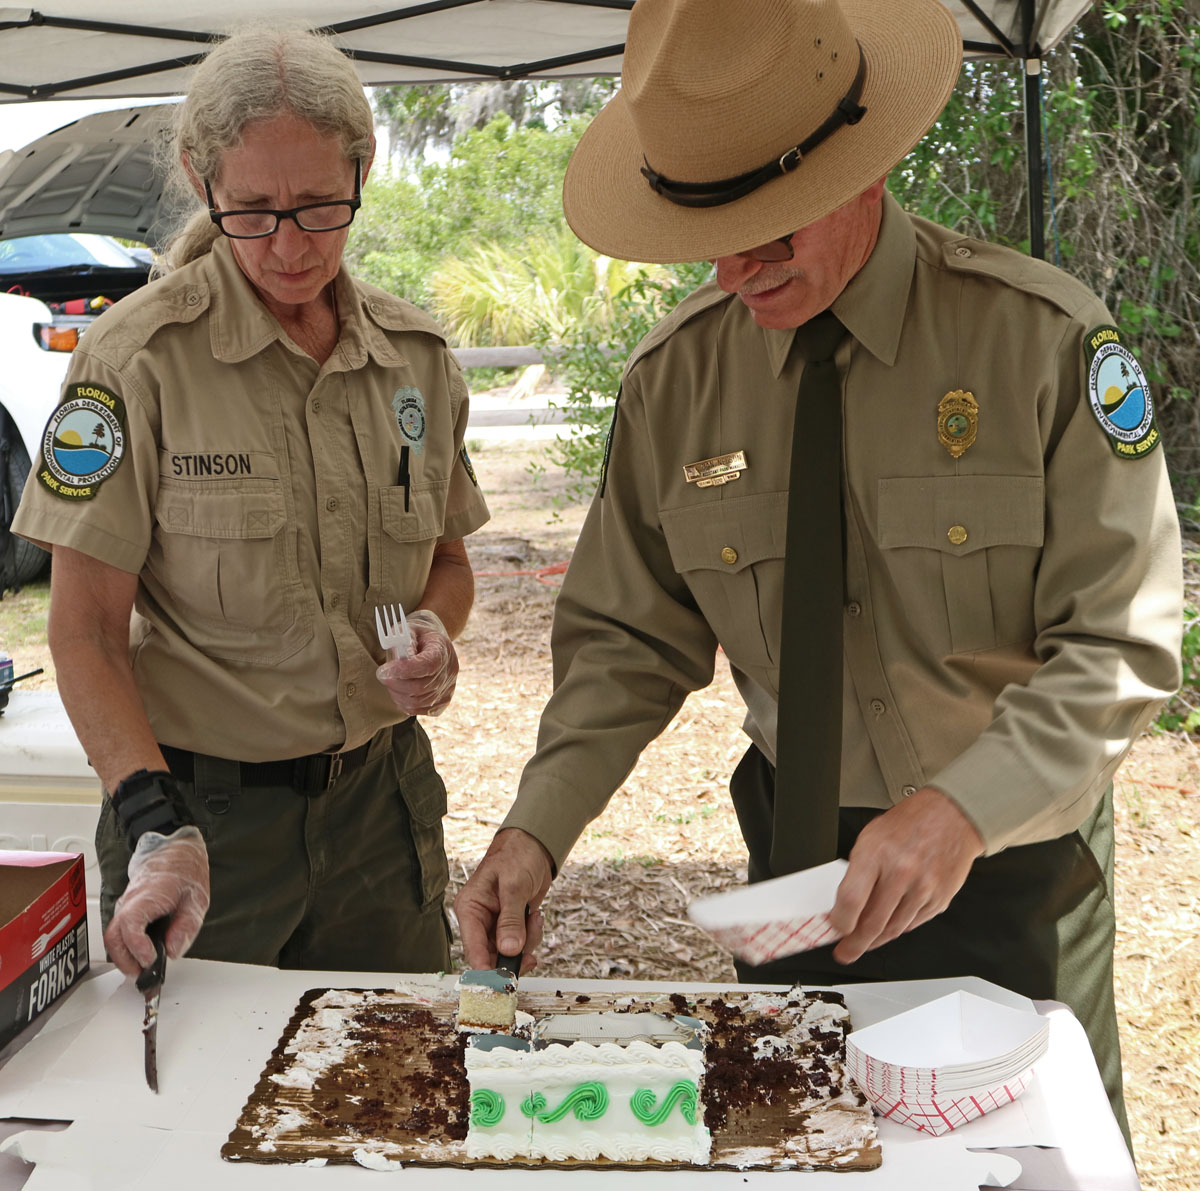 Diana Stinson assists with serving cake at a special event at the park.